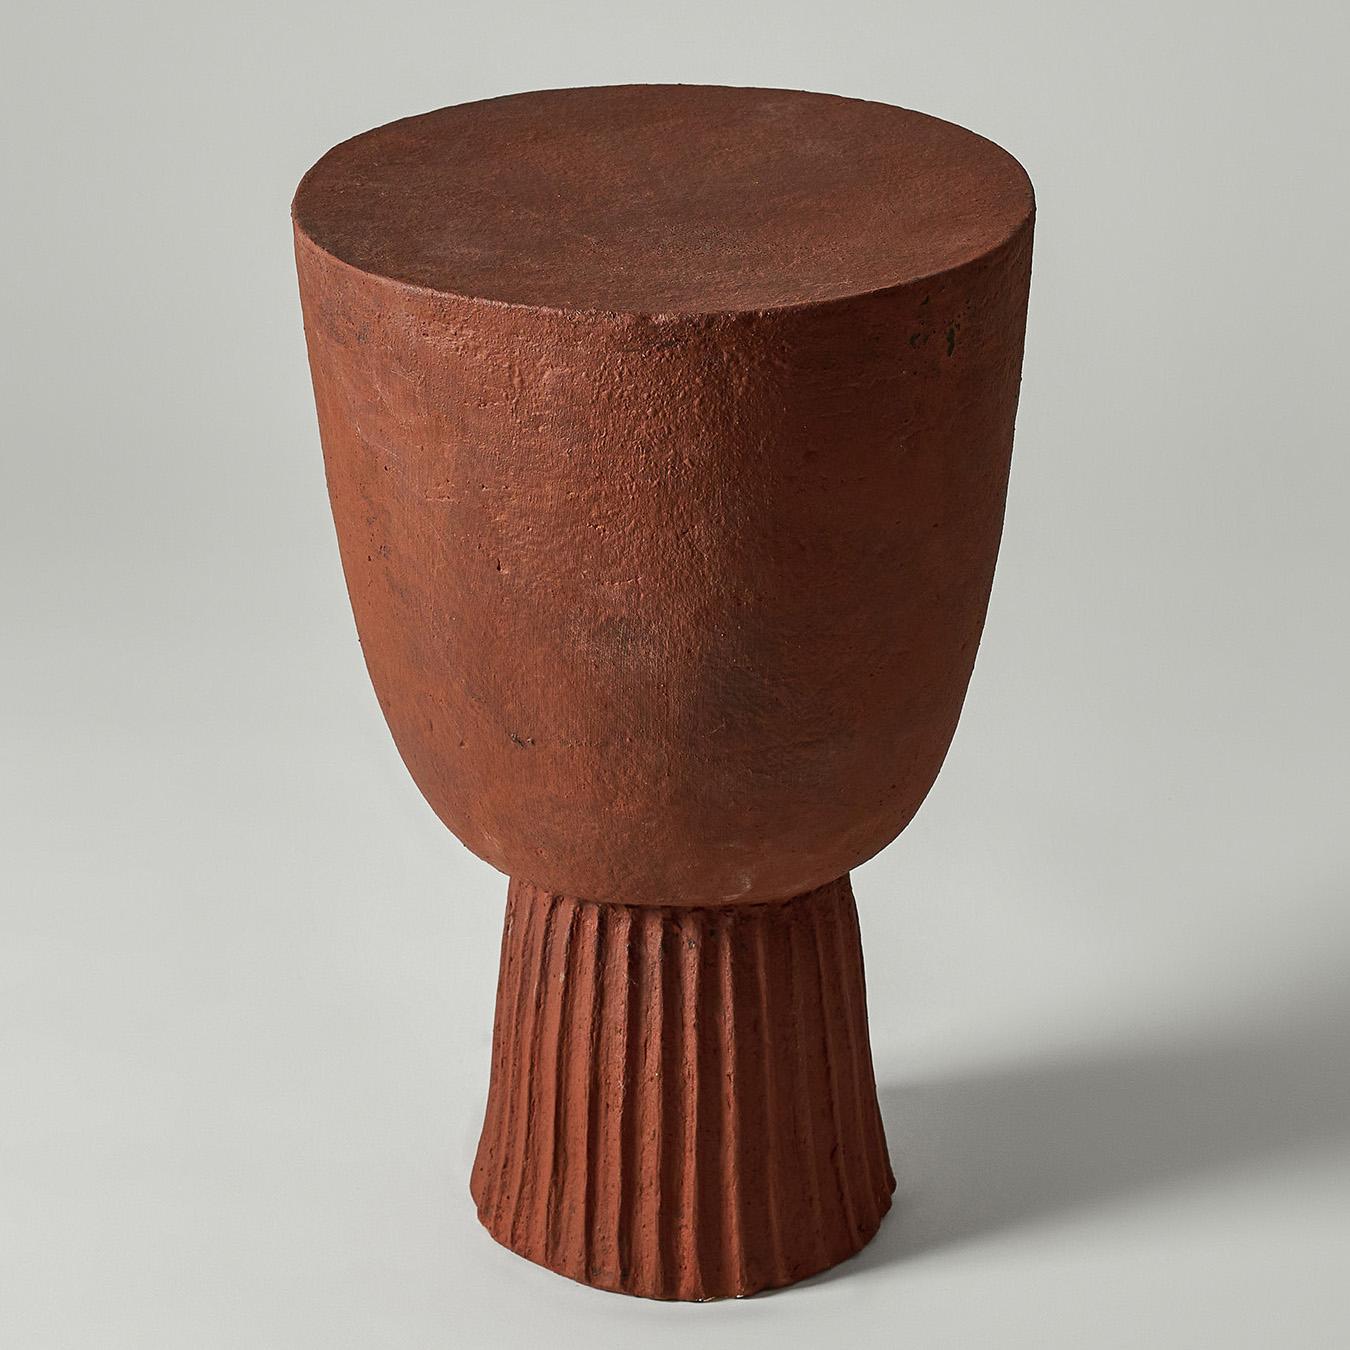 Djembe Side Table by Perler
Limited Edition
Dimensions: Ø 31 x H 48 cm.
Materials: Multiple-fired chamotte clay in a terracotta (reddish-brown) shade.
Weight: 13 kg.

The handcrafted Djembe side table draws its name from its resemblance to the